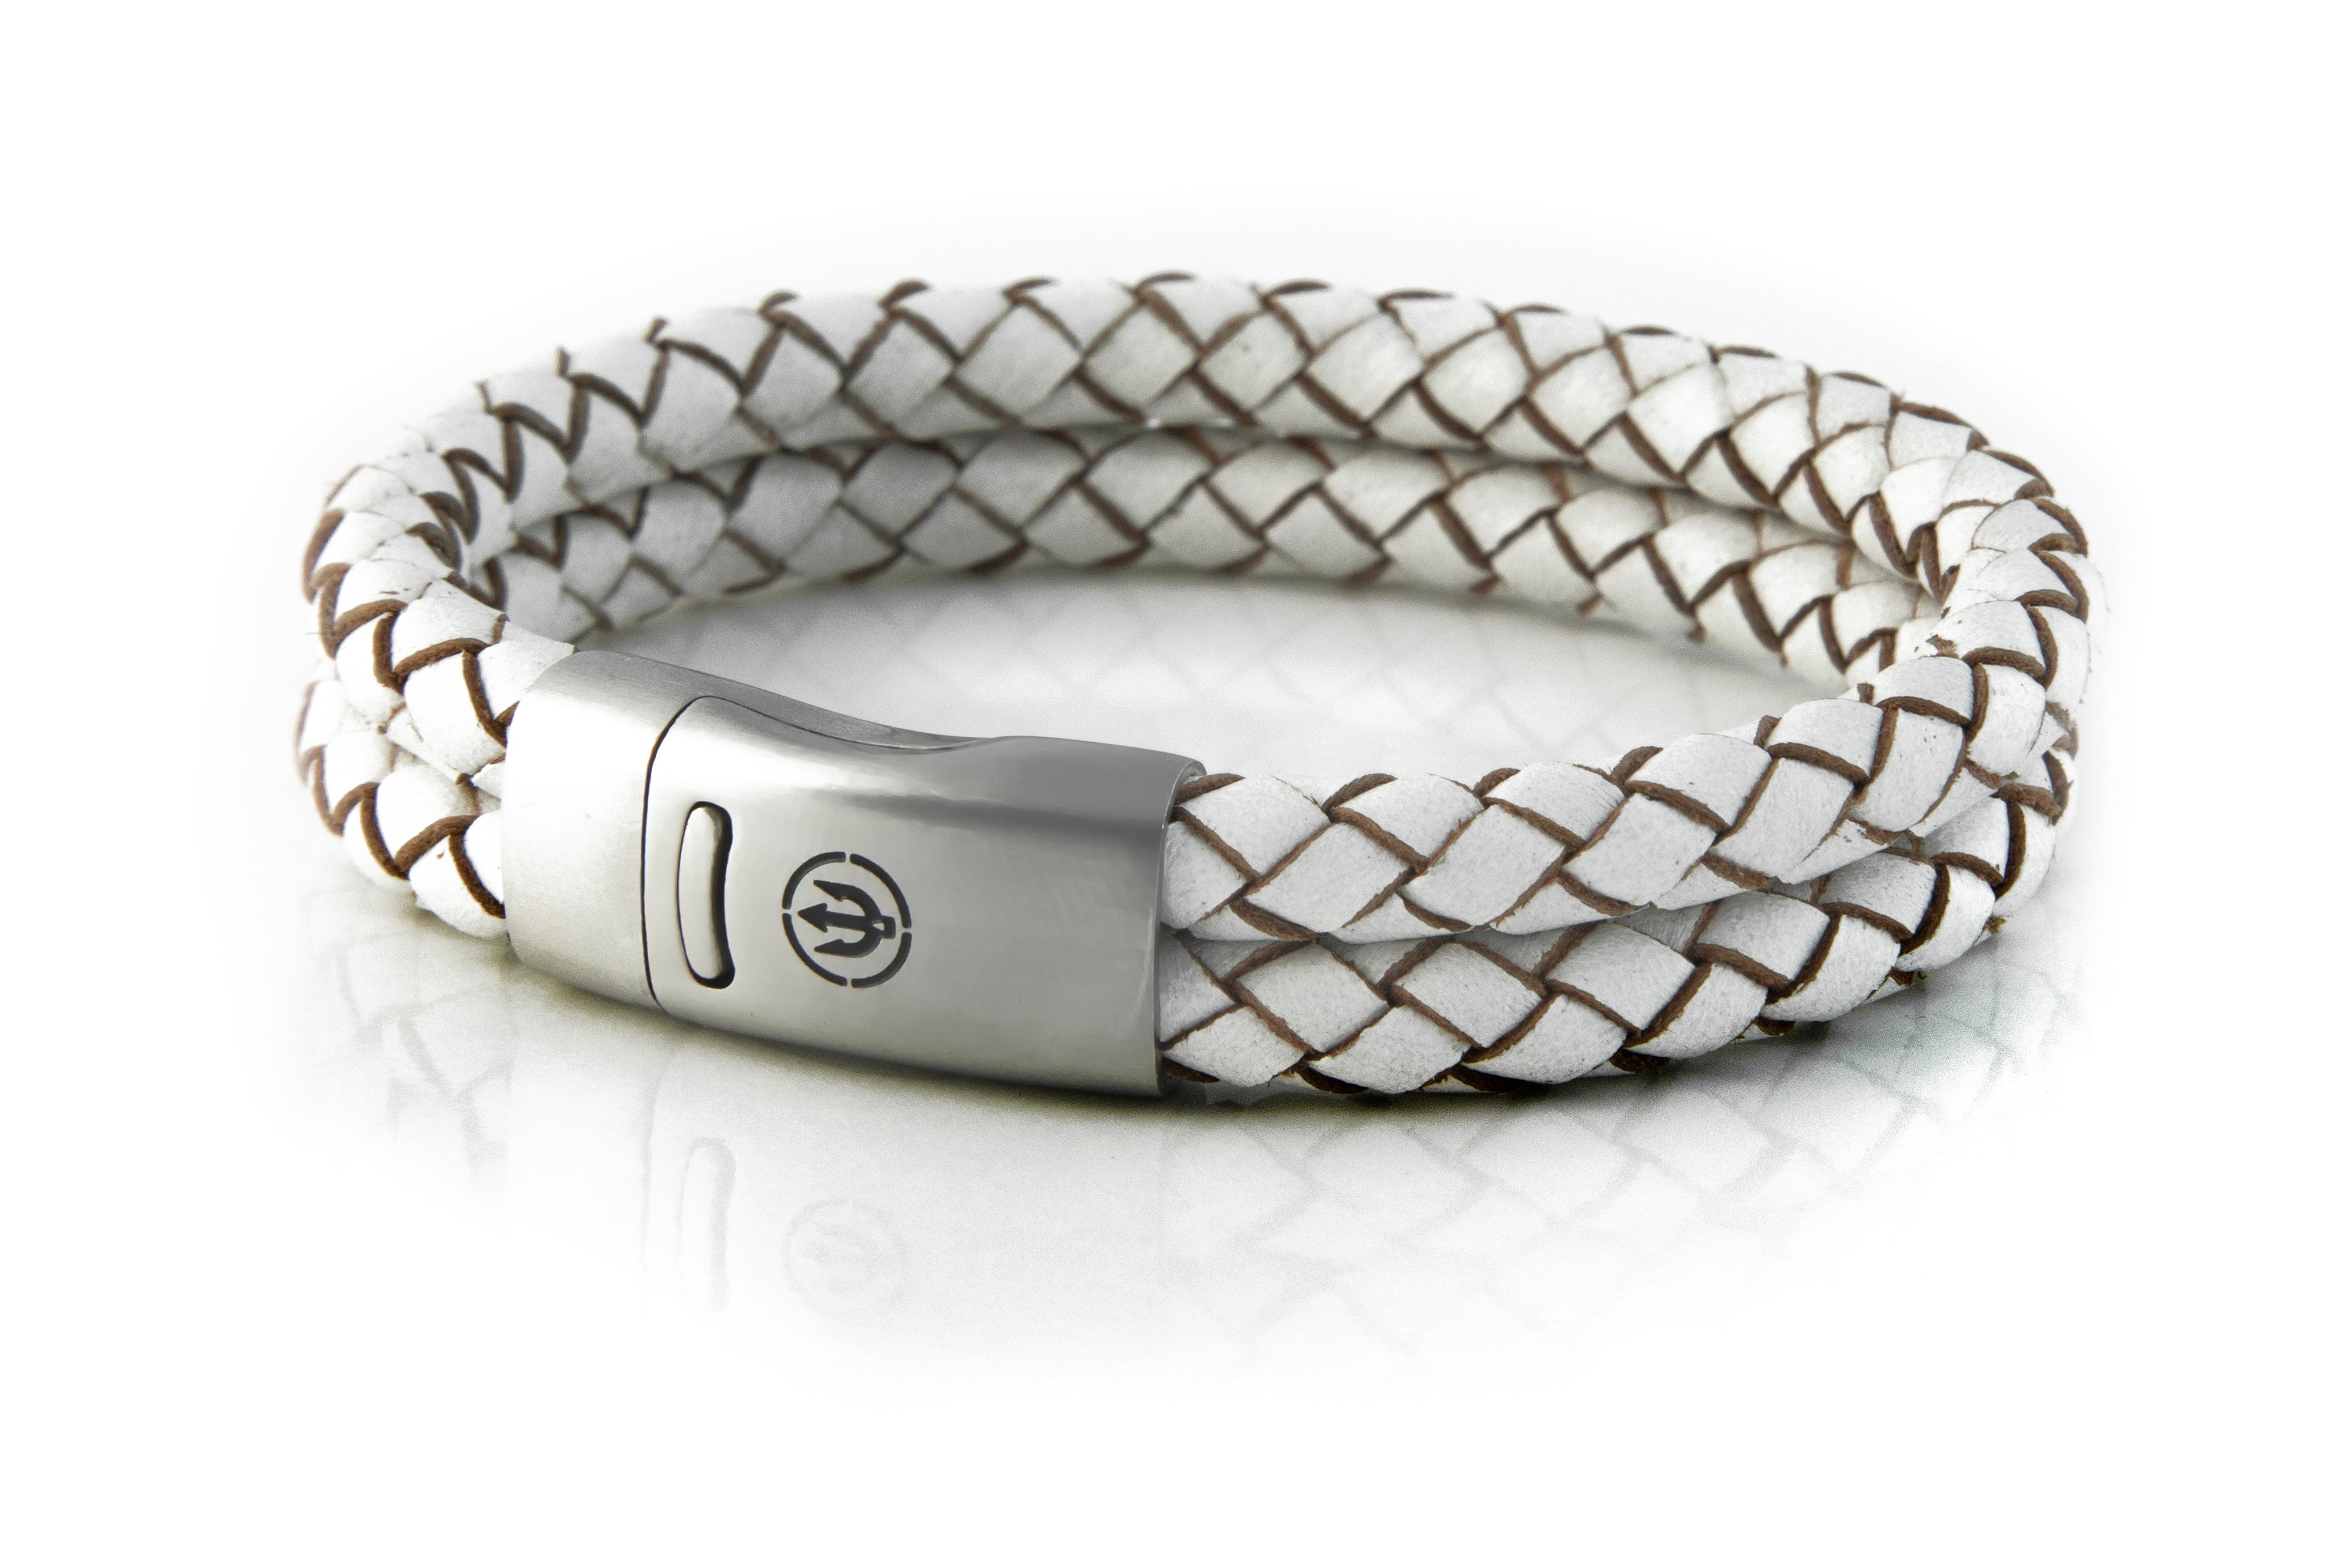 Paracord Bracelet with Stainless Steel Cleat Clasp - Brentwood Jewelry